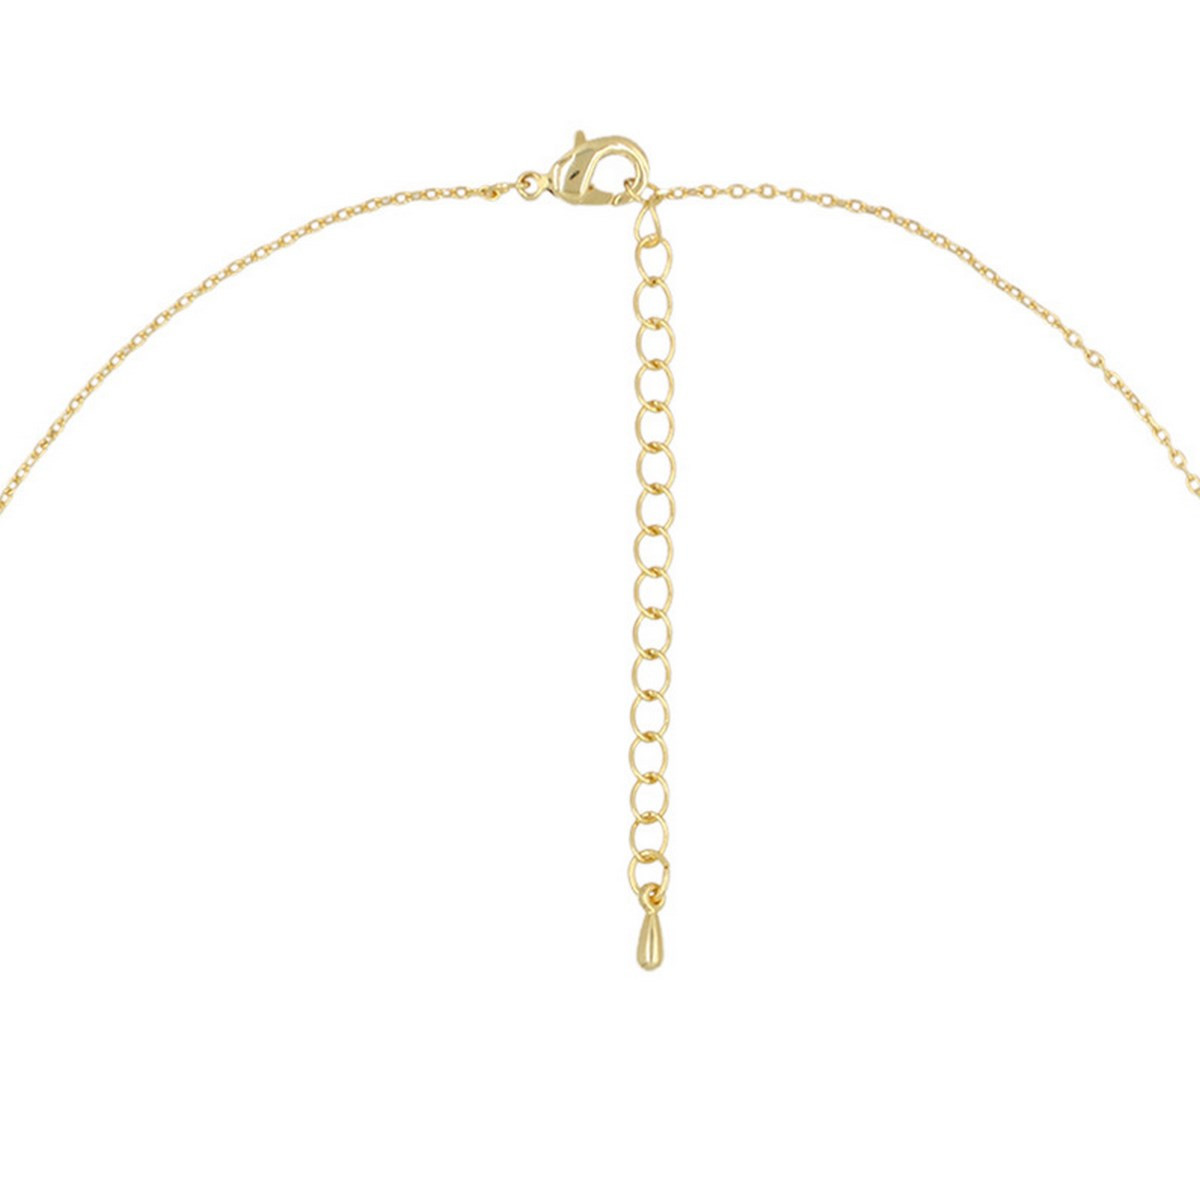 Collier Lettre R Bambou